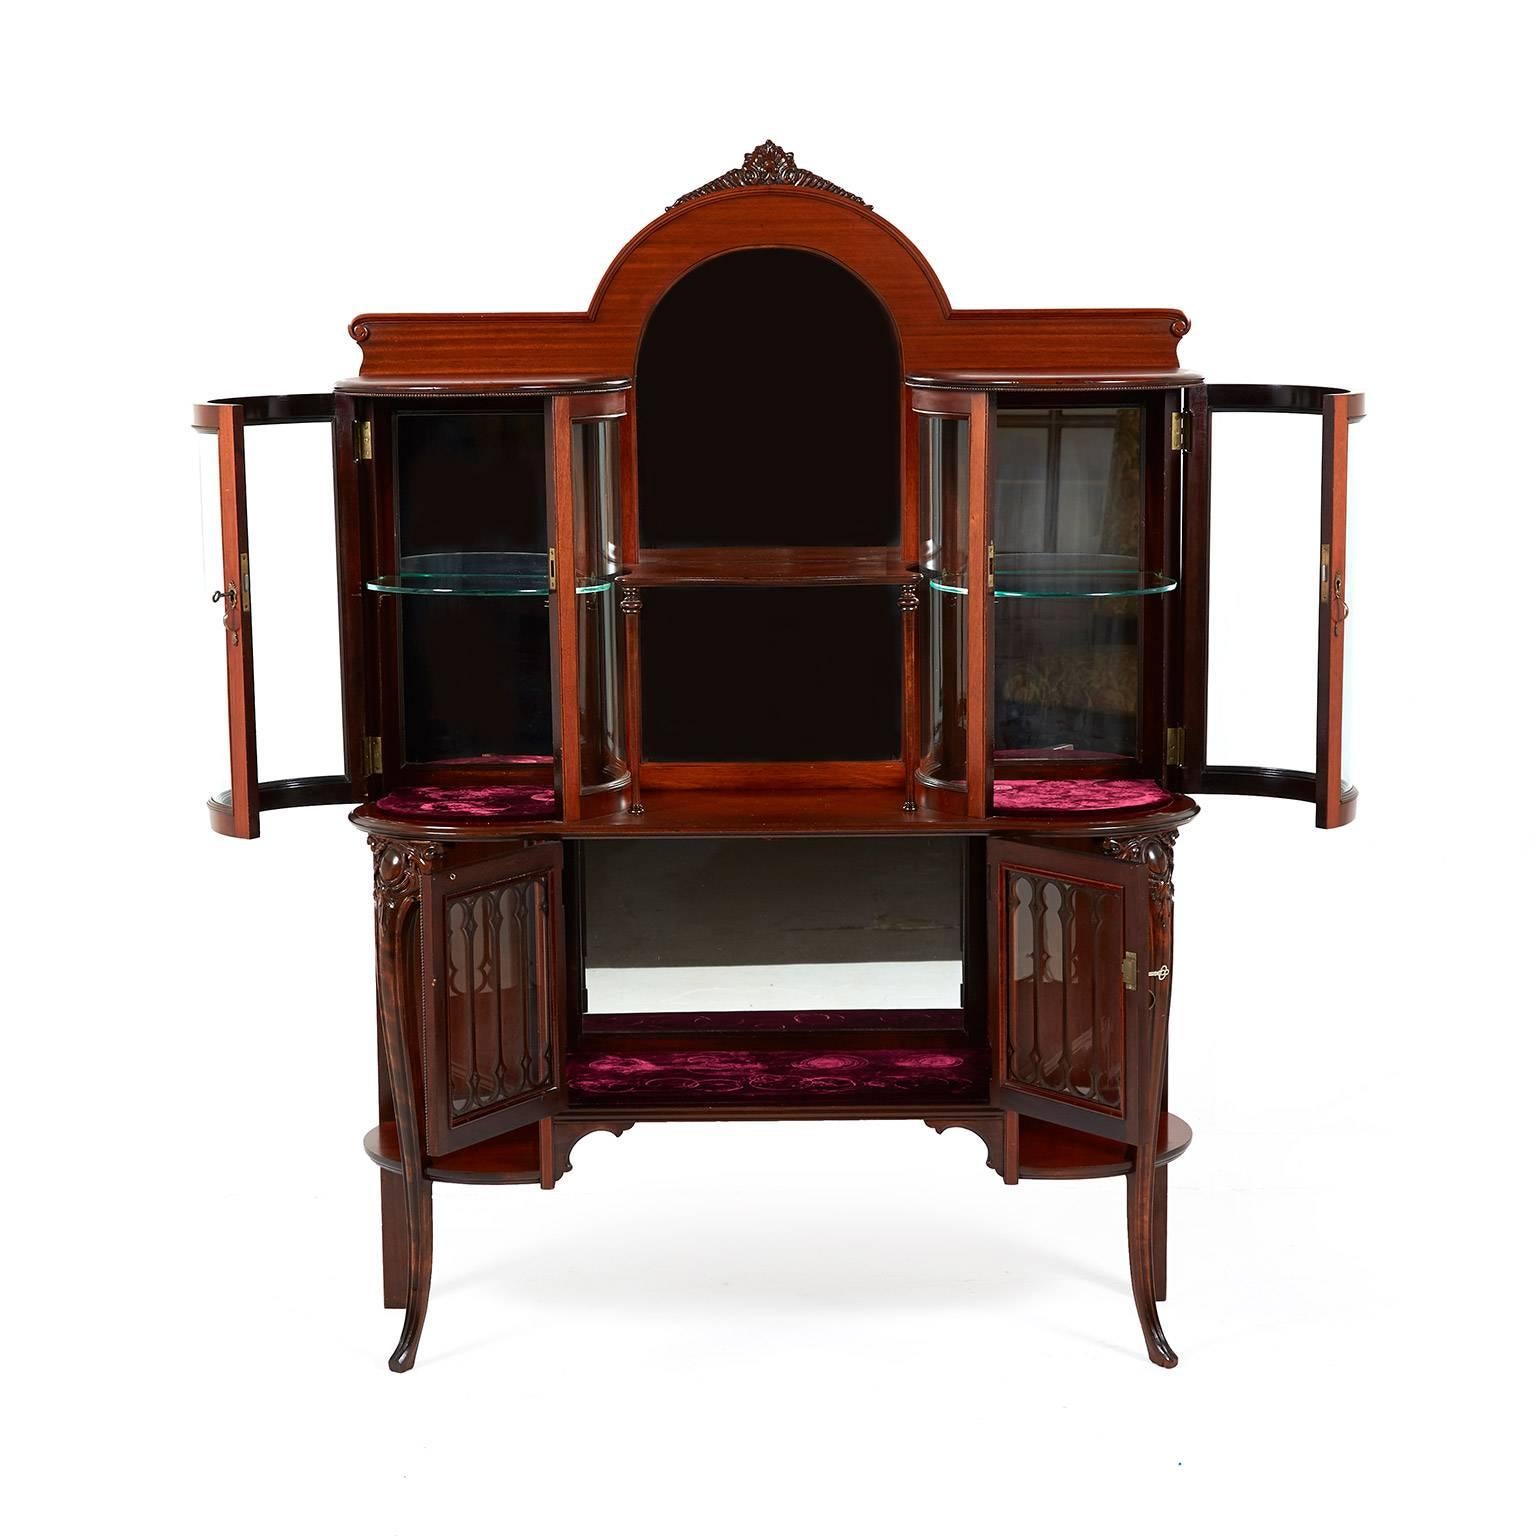 Antique American Victorian china cabinet with unusual curved glass display, circa 1890. This is an American production in the Classic Victorian style. Very solid mahogany with impressive curved glass display portion. Delicate wooden fretting on the